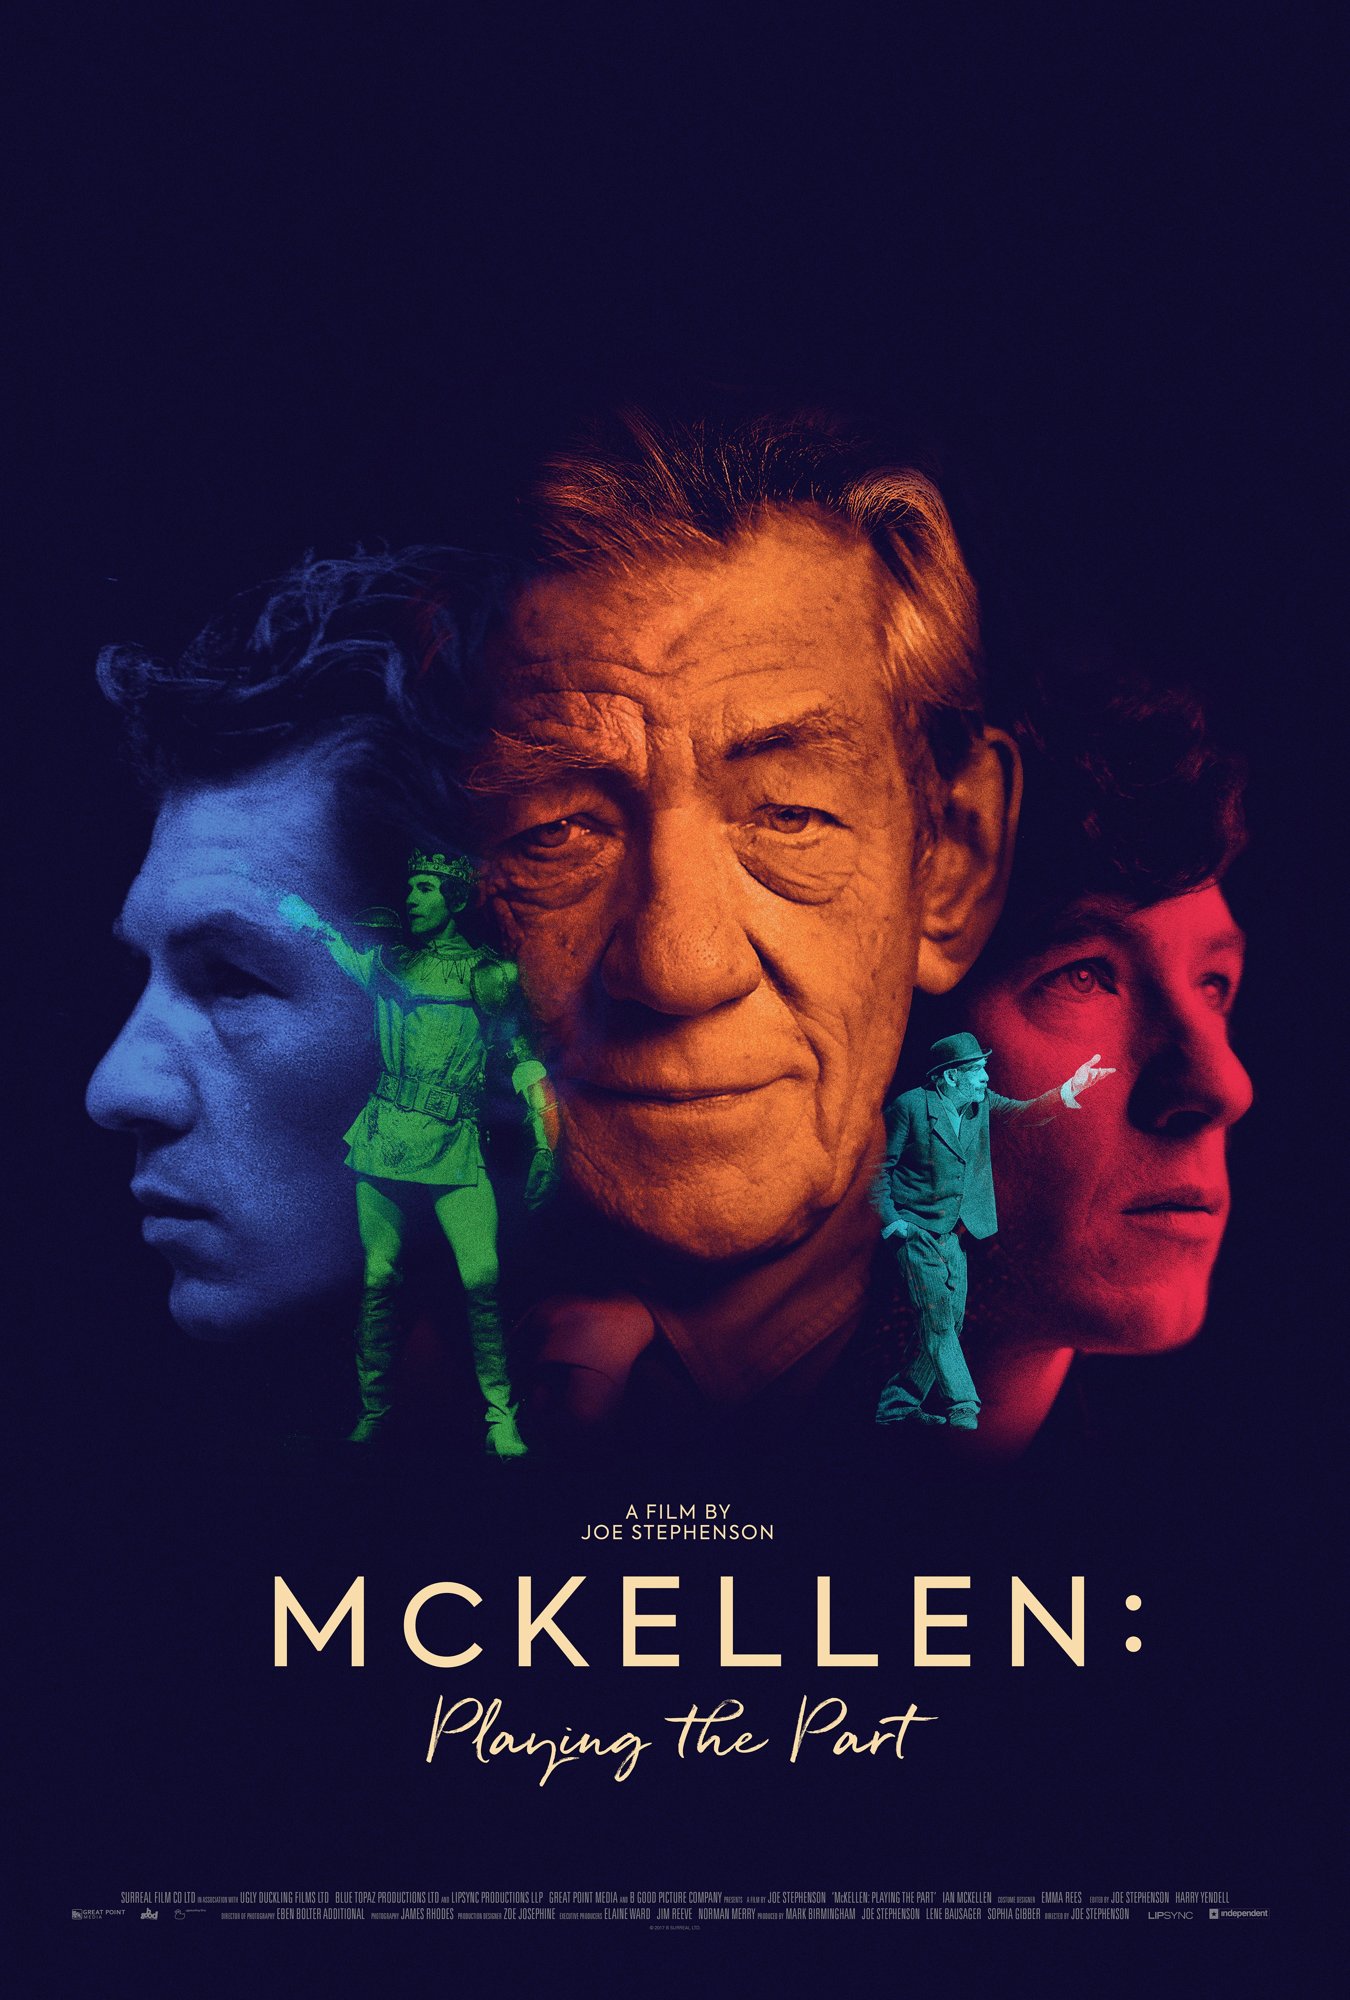 McKellen: Playing the Part (2018) Pictures, Trailer, Reviews, News, DVD and Soundtrack